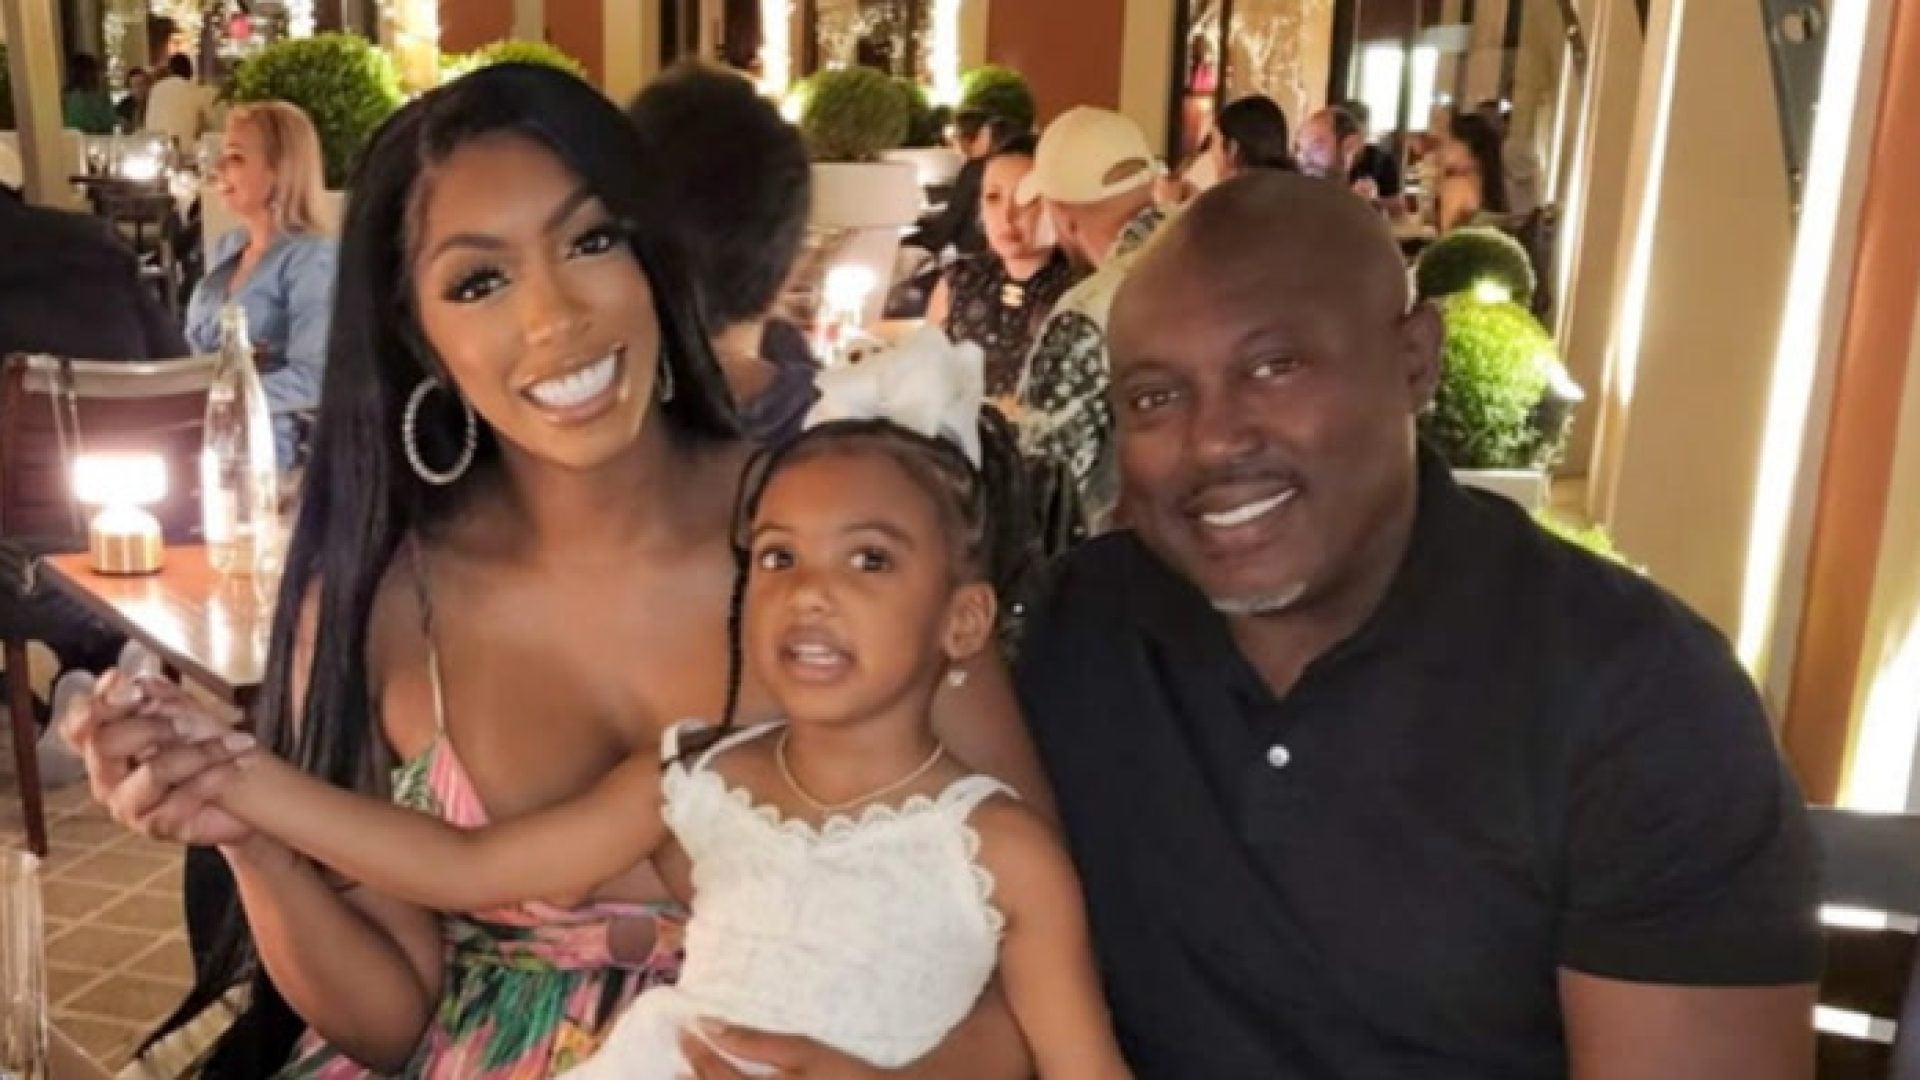 WATCH: In My Feed – Porsha Williams And Her Blended Family Celebrates Pilar’s 4th Birthday